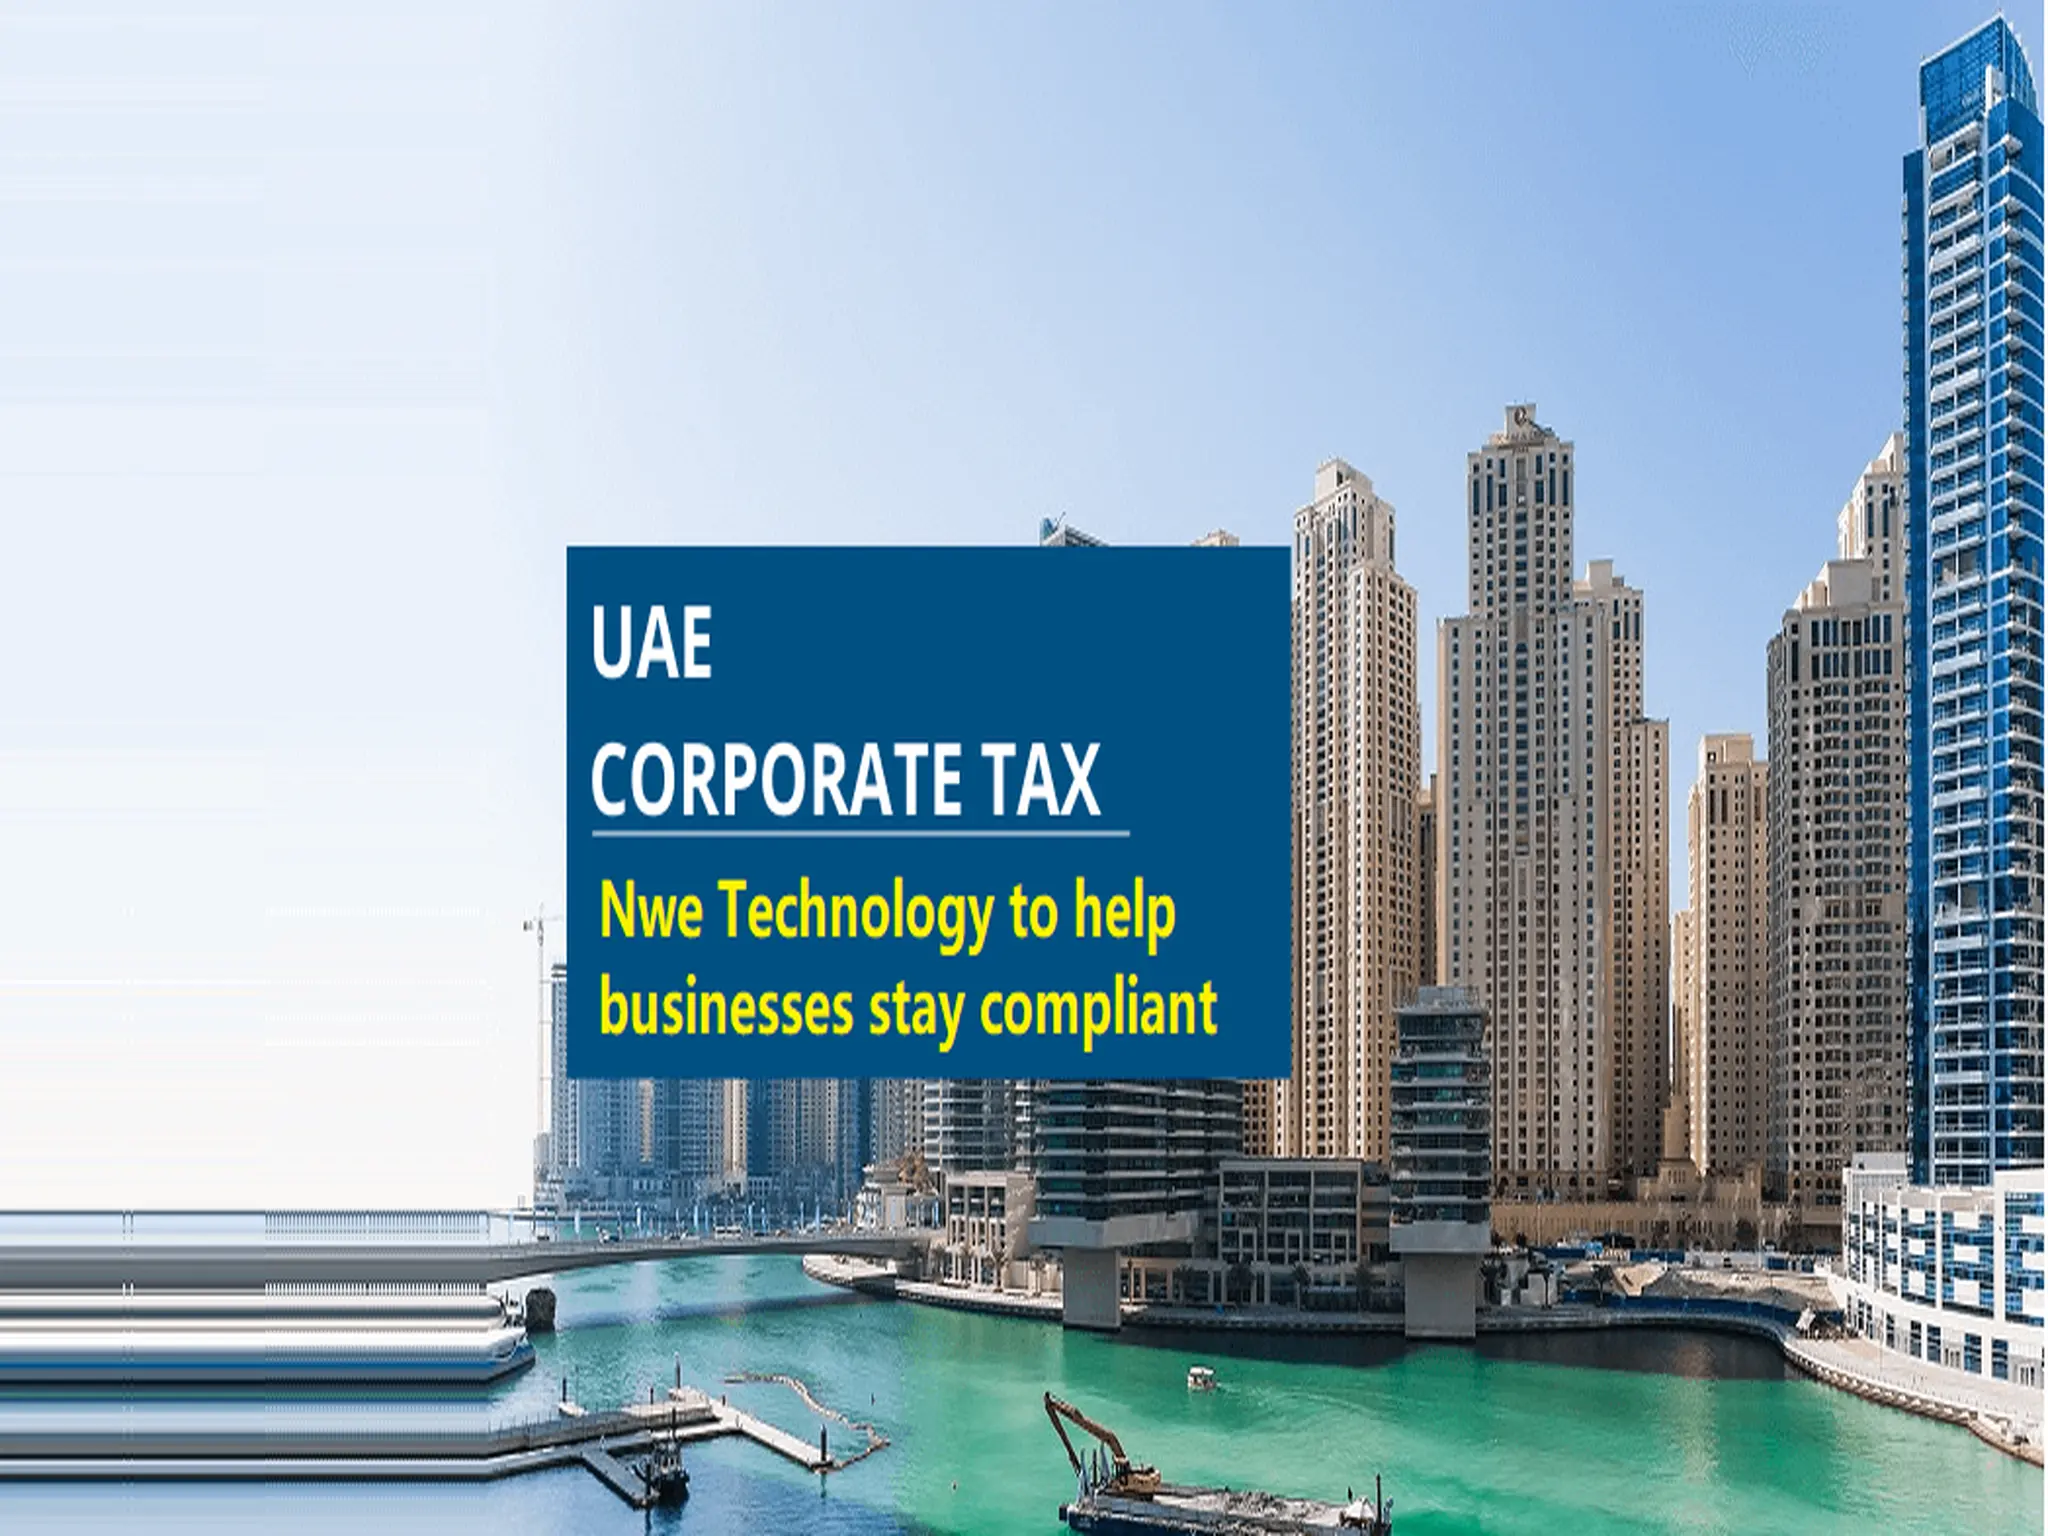 UAE Corporate Tax: new Technology to help businesses stay compliant